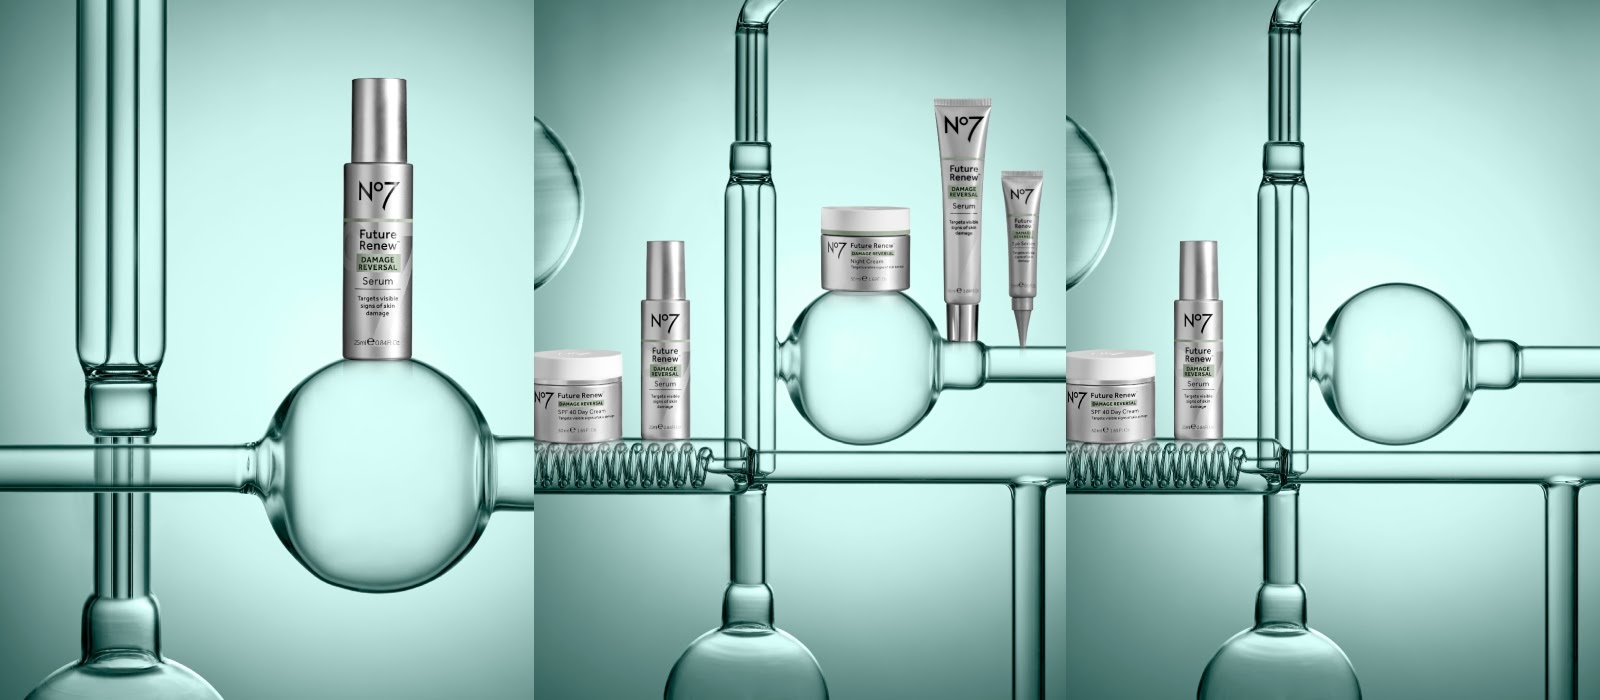 This four-prod skincare range contains a world-first peptide blend that repairs skin